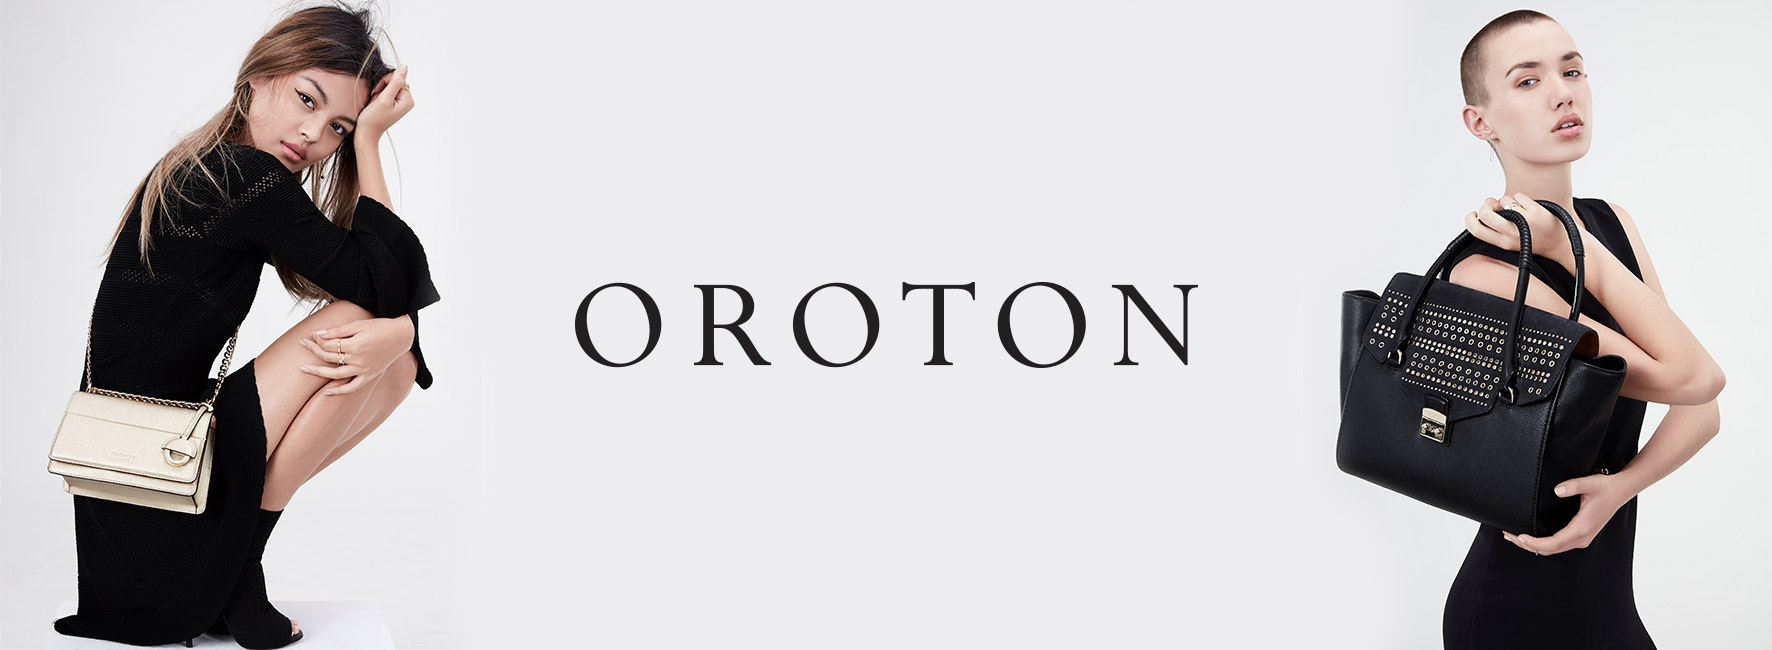 All Oroton Deals & Promotions